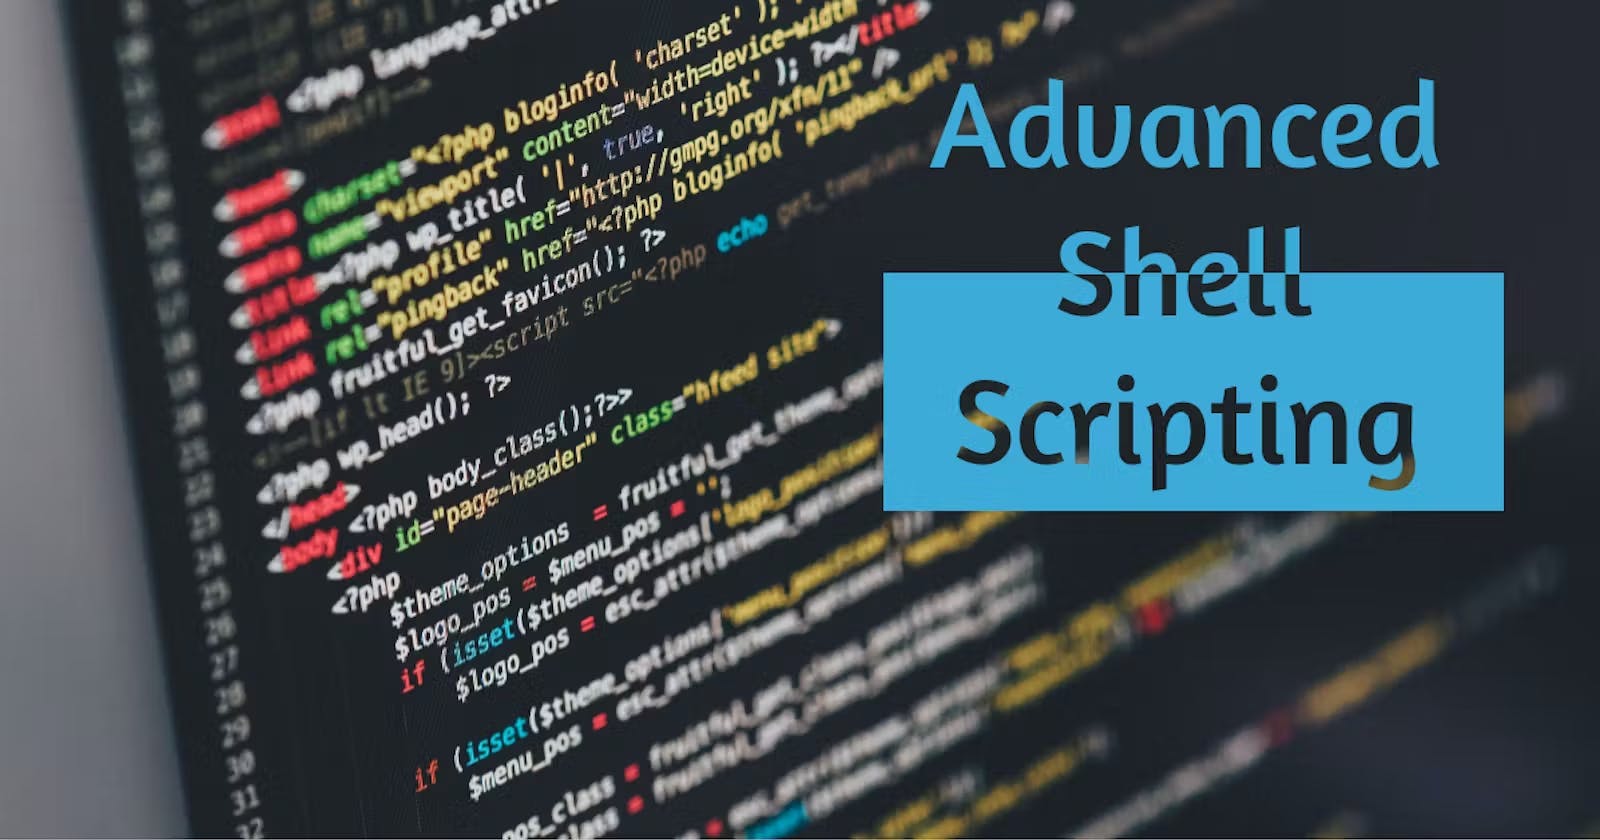 DAY-5
Advanced Linux Shell Scripting